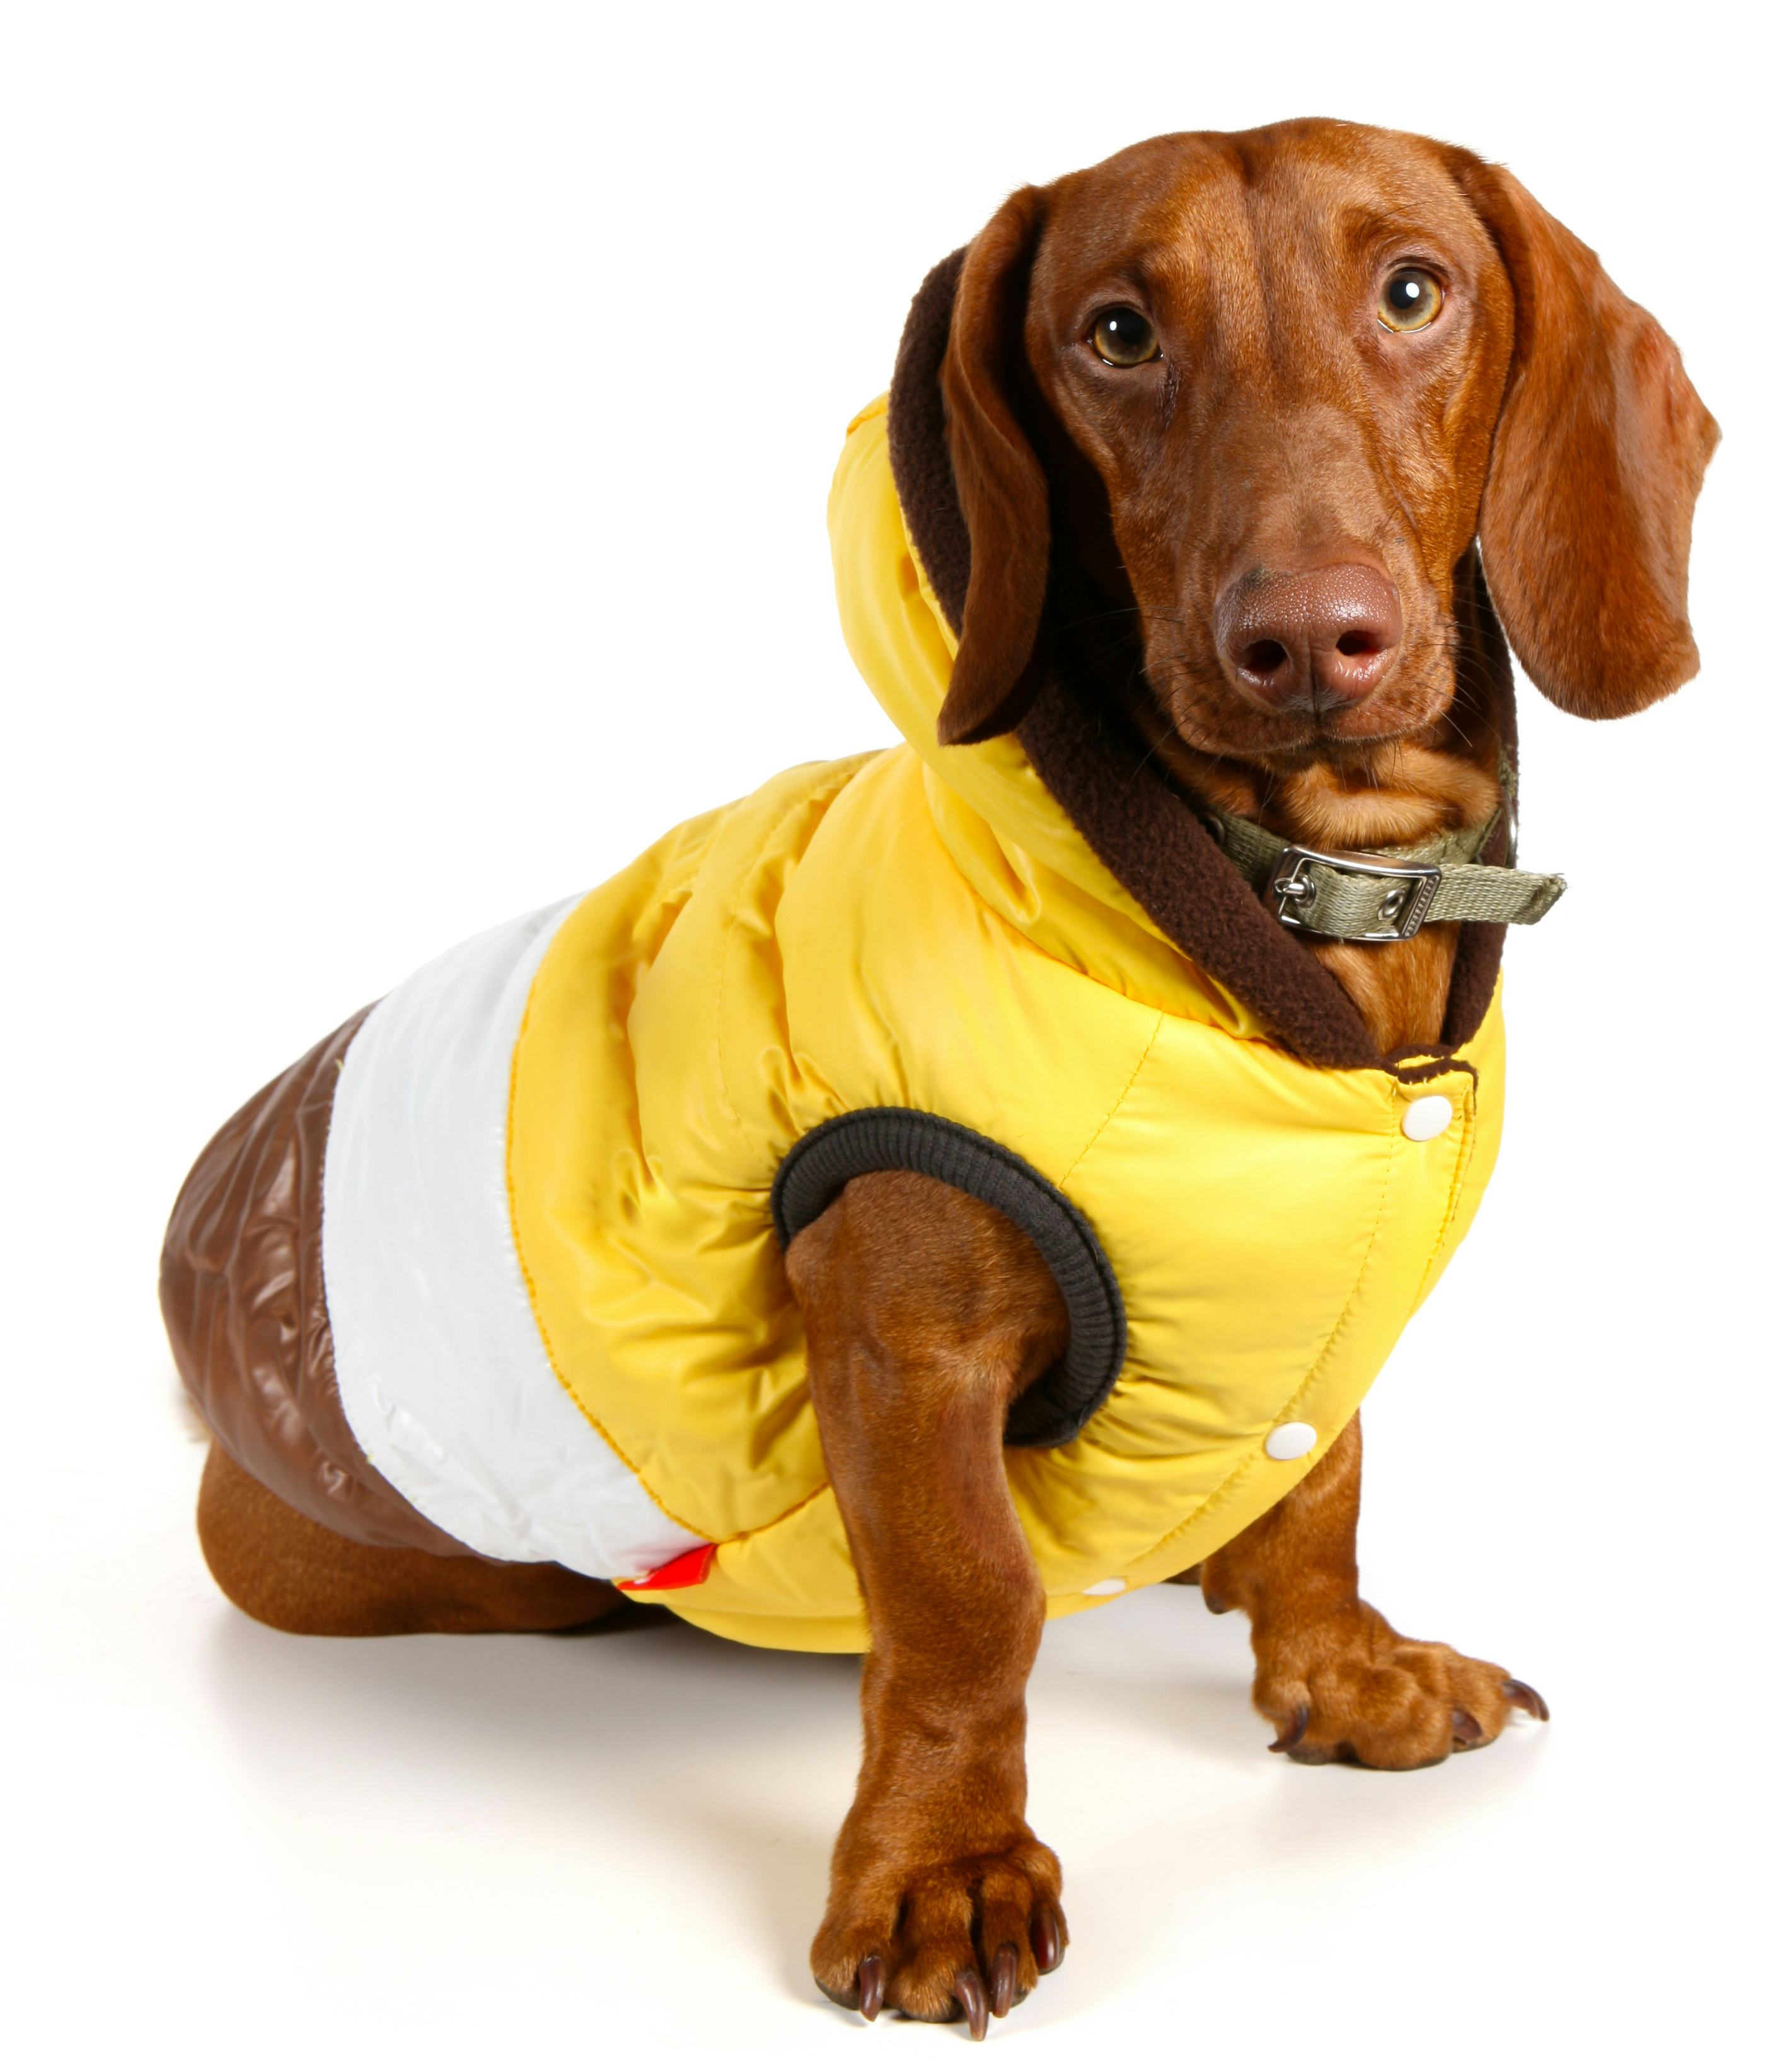 Dog in a yellow life jacket